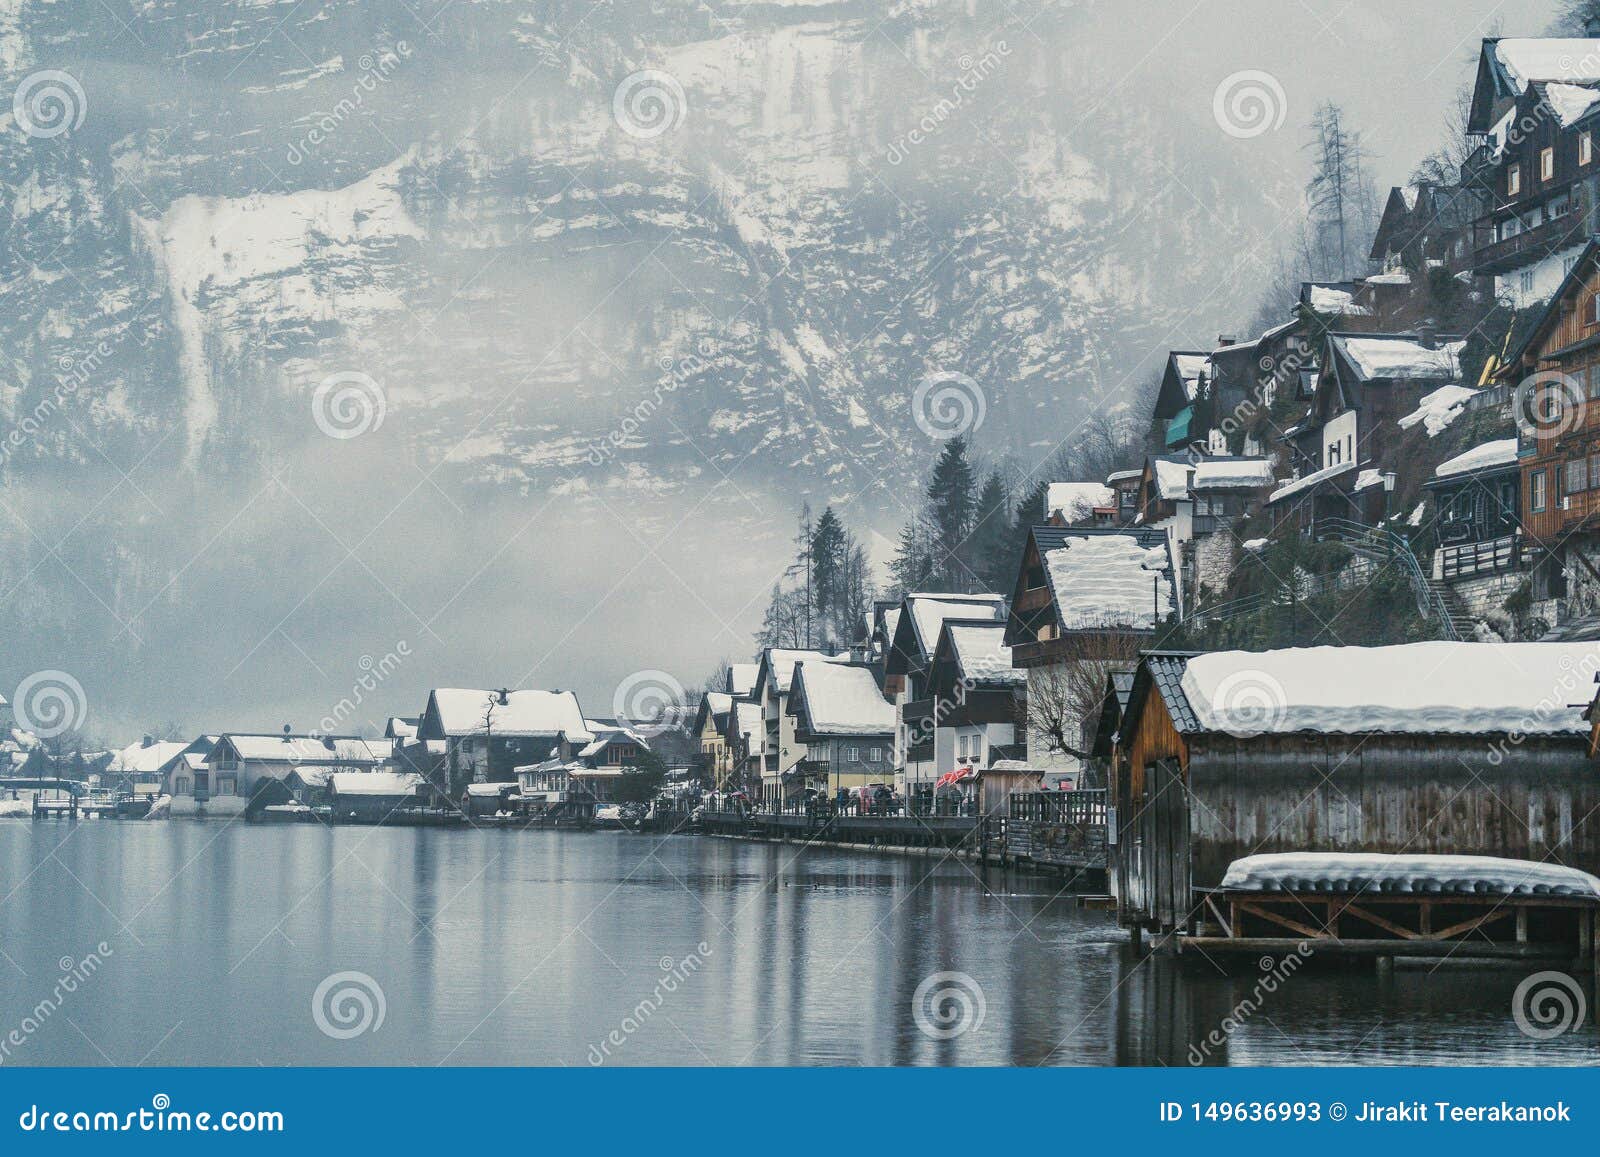 Dreamy European Village on a Lake Covered by Fog and Romantic and